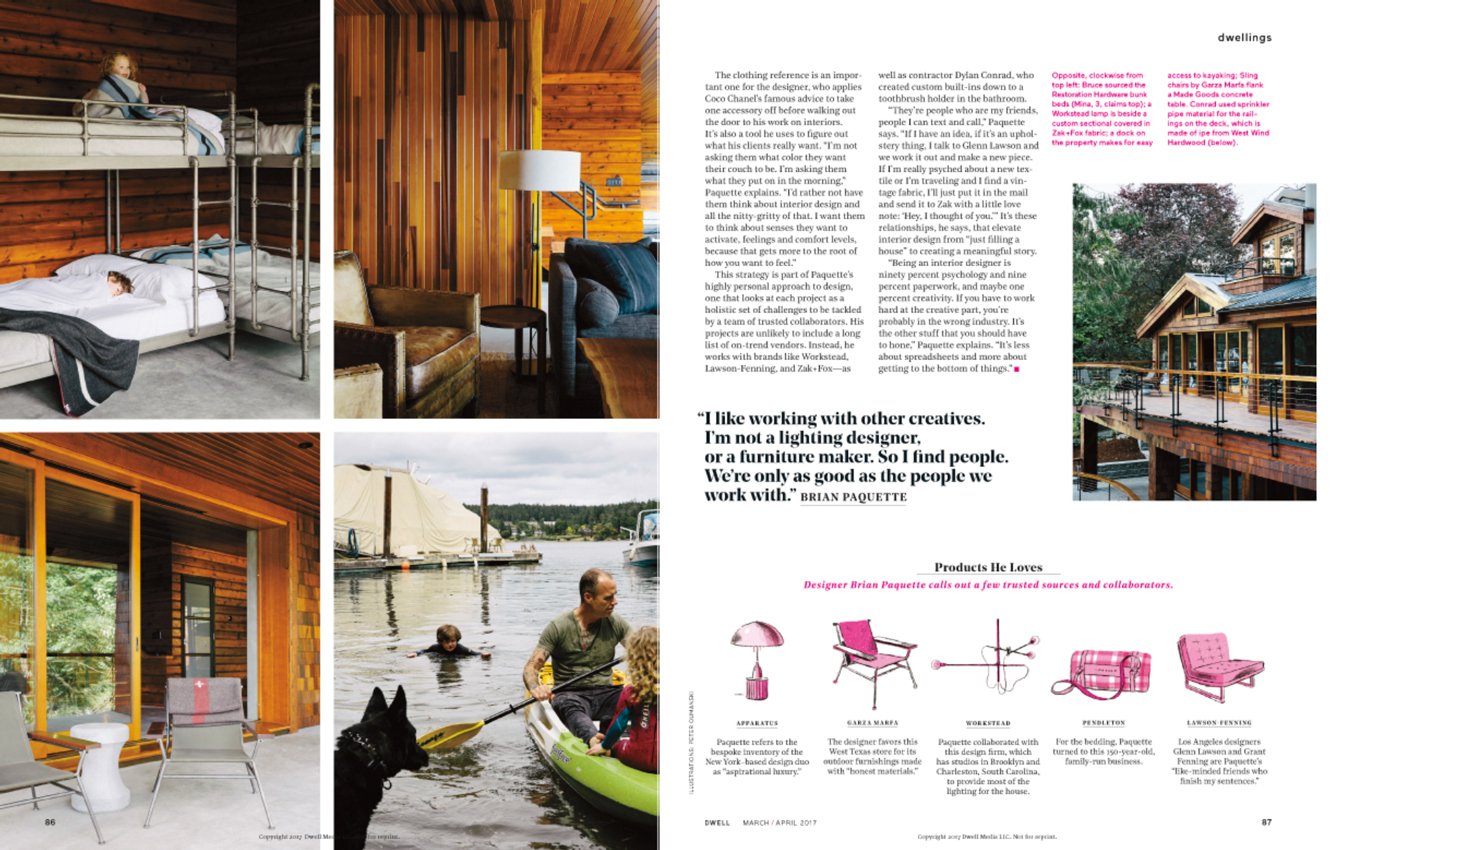 A tear sheet from Dwell Magazine that offers an intimate look inside a wooden house. Photos by Grant Harder.